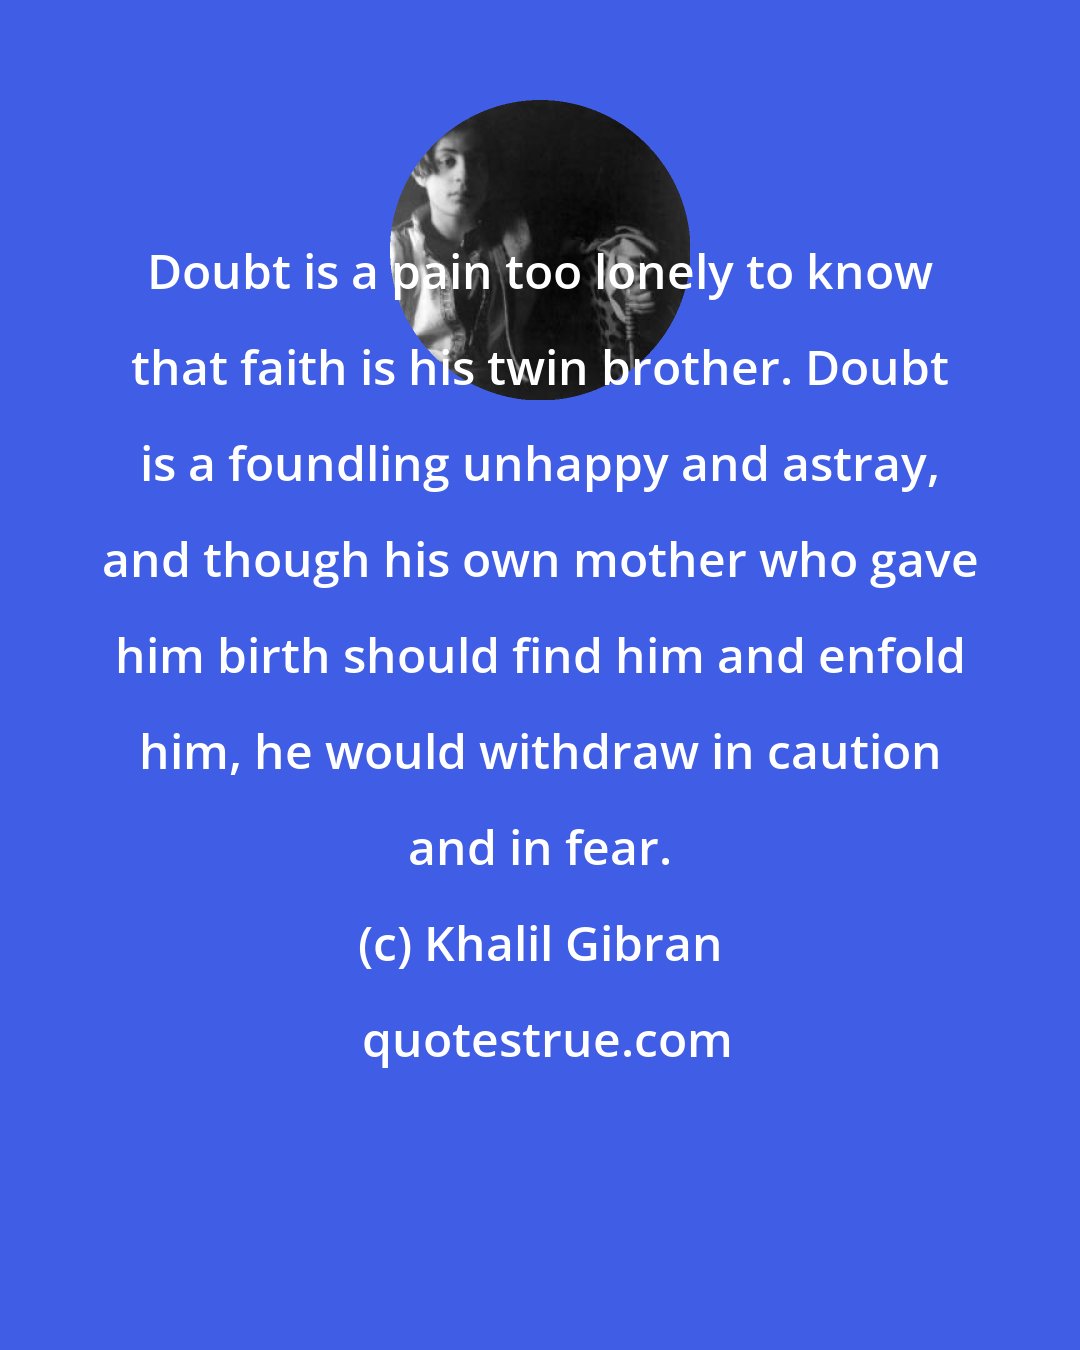 Khalil Gibran: Doubt is a pain too lonely to know that faith is his twin brother. Doubt is a foundling unhappy and astray, and though his own mother who gave him birth should find him and enfold him, he would withdraw in caution and in fear.